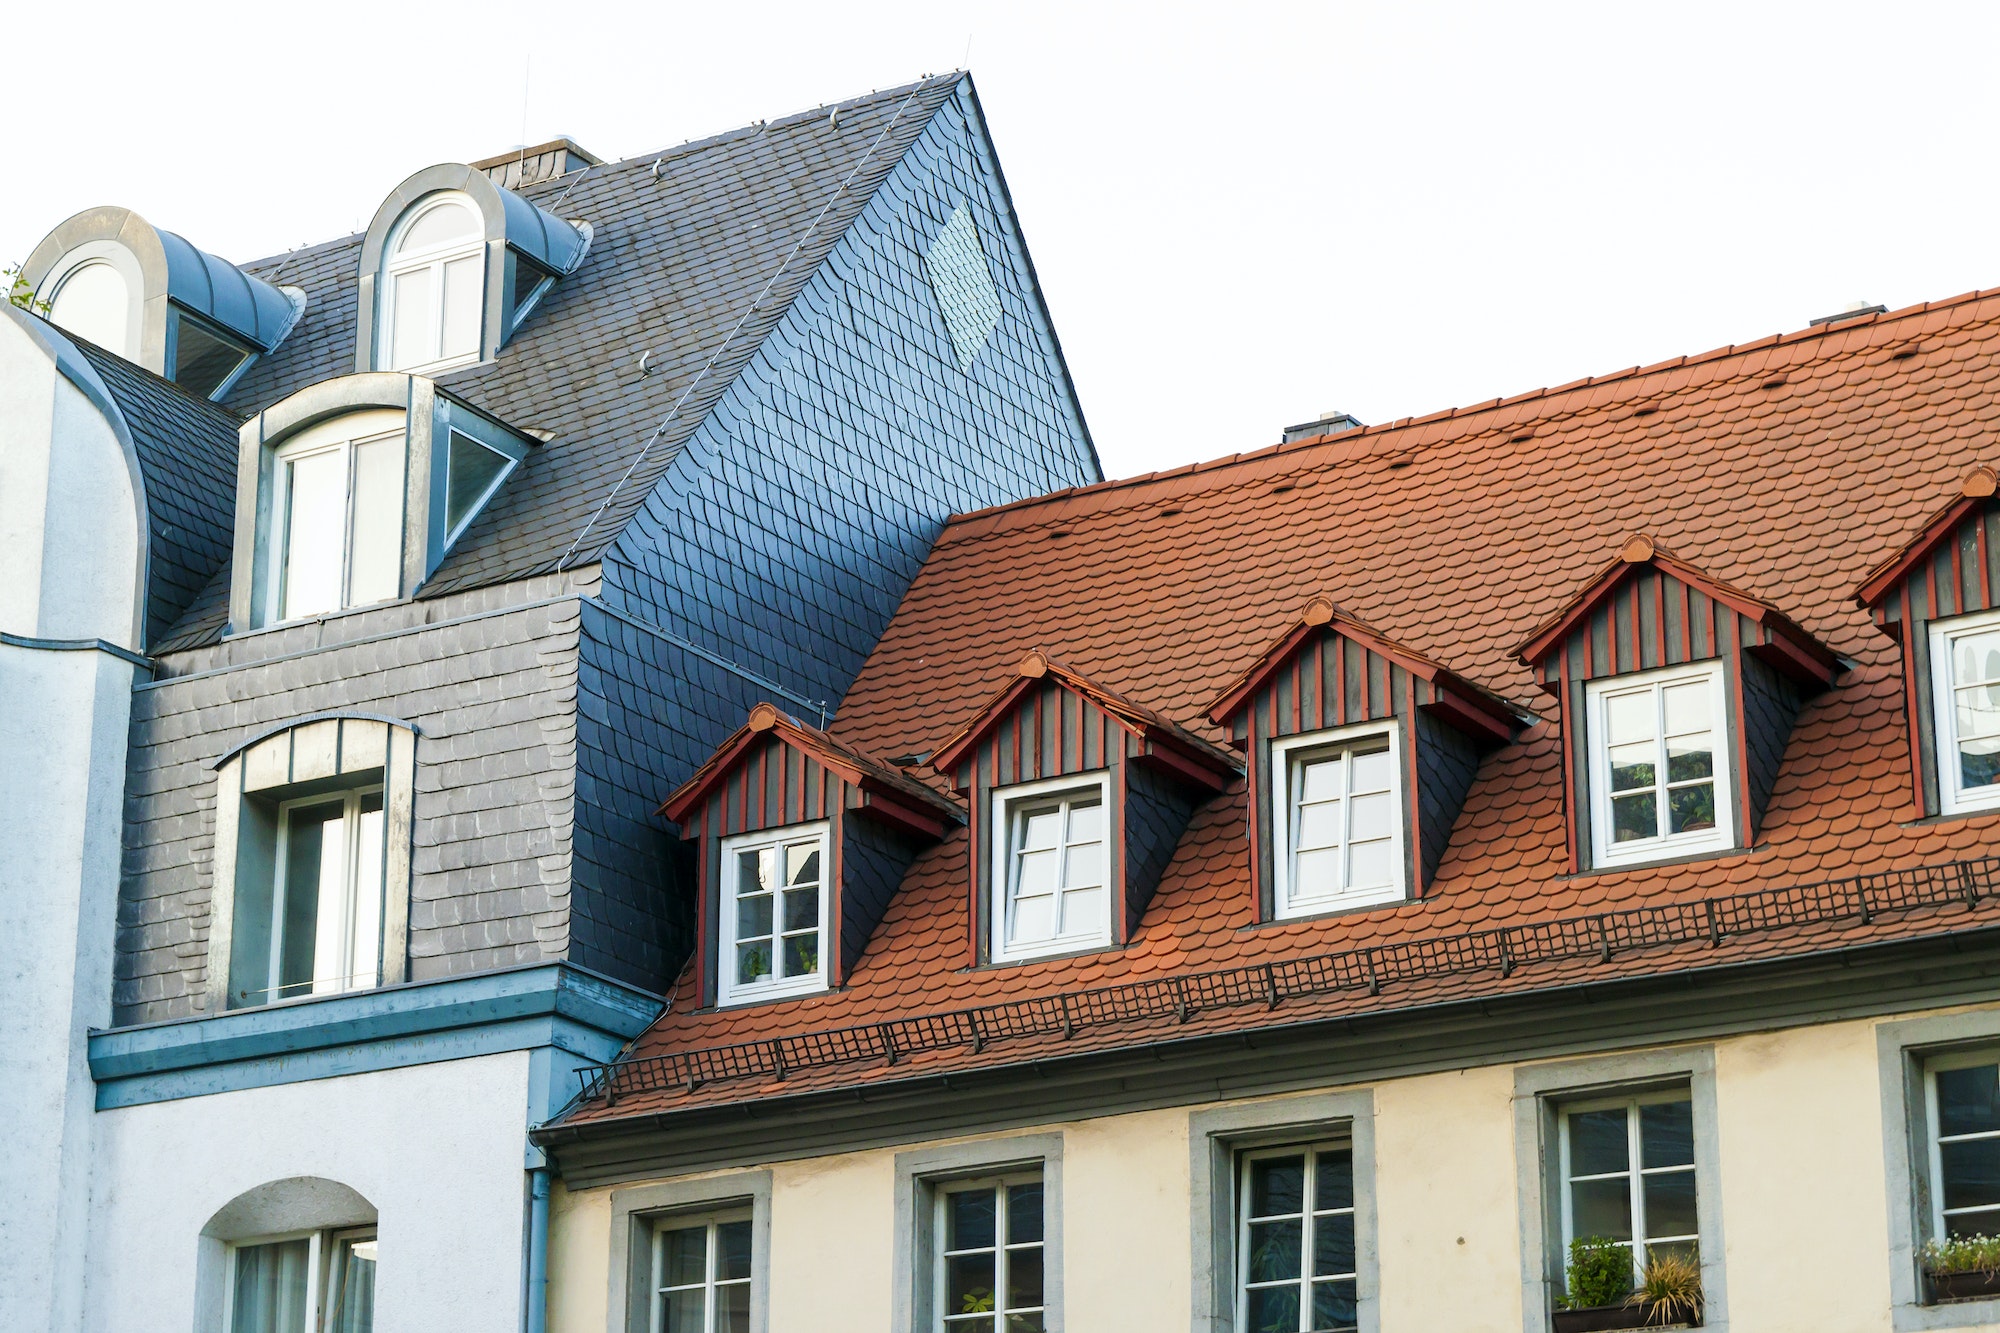 Roofs of old houses with roof windows and orange roof tiles in German city